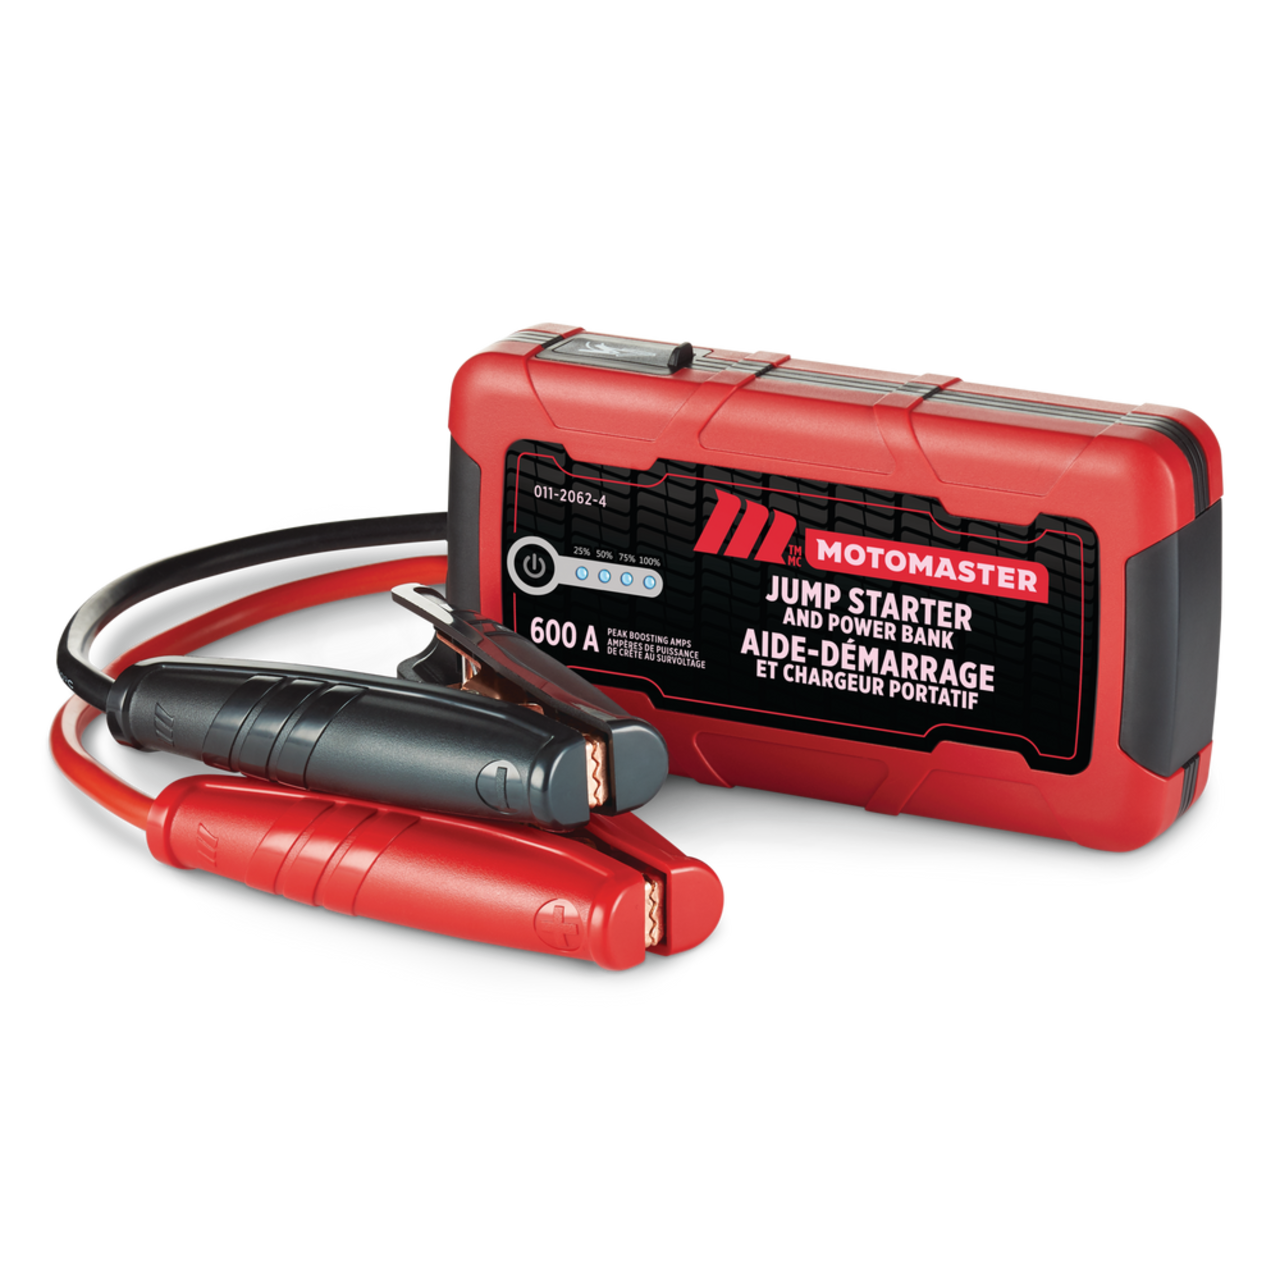 https://media-www.canadiantire.ca/product/automotive/light-auto-parts/auto-battery-accessories/0112062/motomaster-600a-lithium-jump-starter-0d78e1e7-5cb7-4a5f-9769-f7b2c9c840a8.png?imdensity=1&imwidth=640&impolicy=mZoom